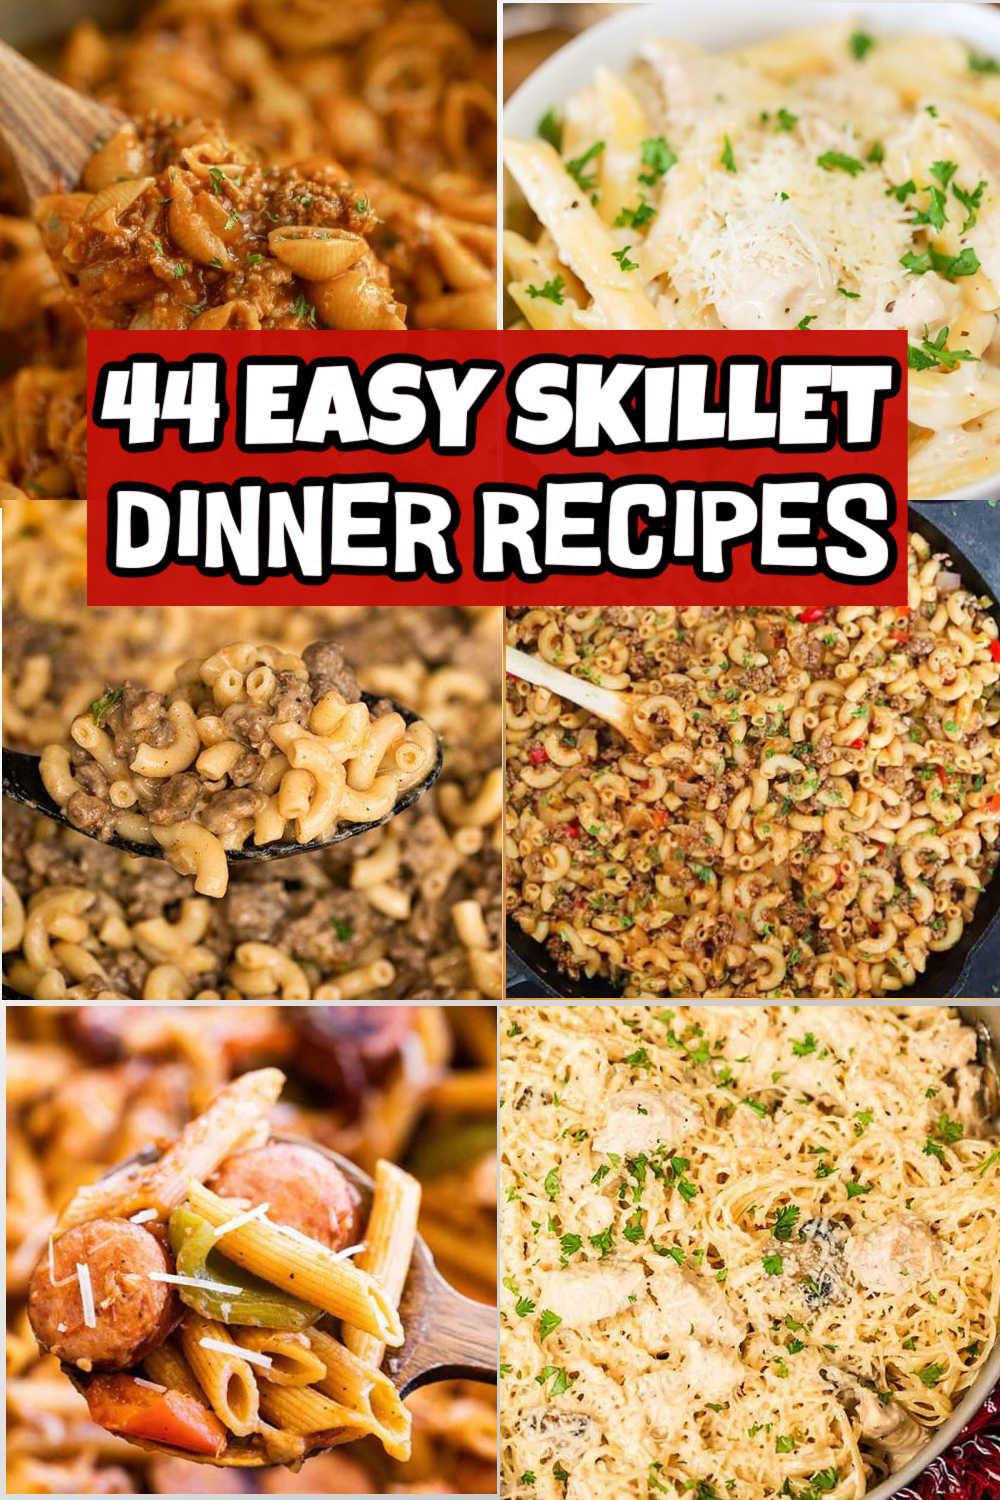 The Best Cast Iron Skillet recipes perfect for busy weeknights. Try these 44 easy skillet recipes sure to impress the entire family. From comfort food to healthy options, these tasty recipes will be a hit. Skip store bought meals and expensive take out and make these delicious recipes instead. #eatingonadime #easyskilletdinners #skilletdinners #castironskilletdinners